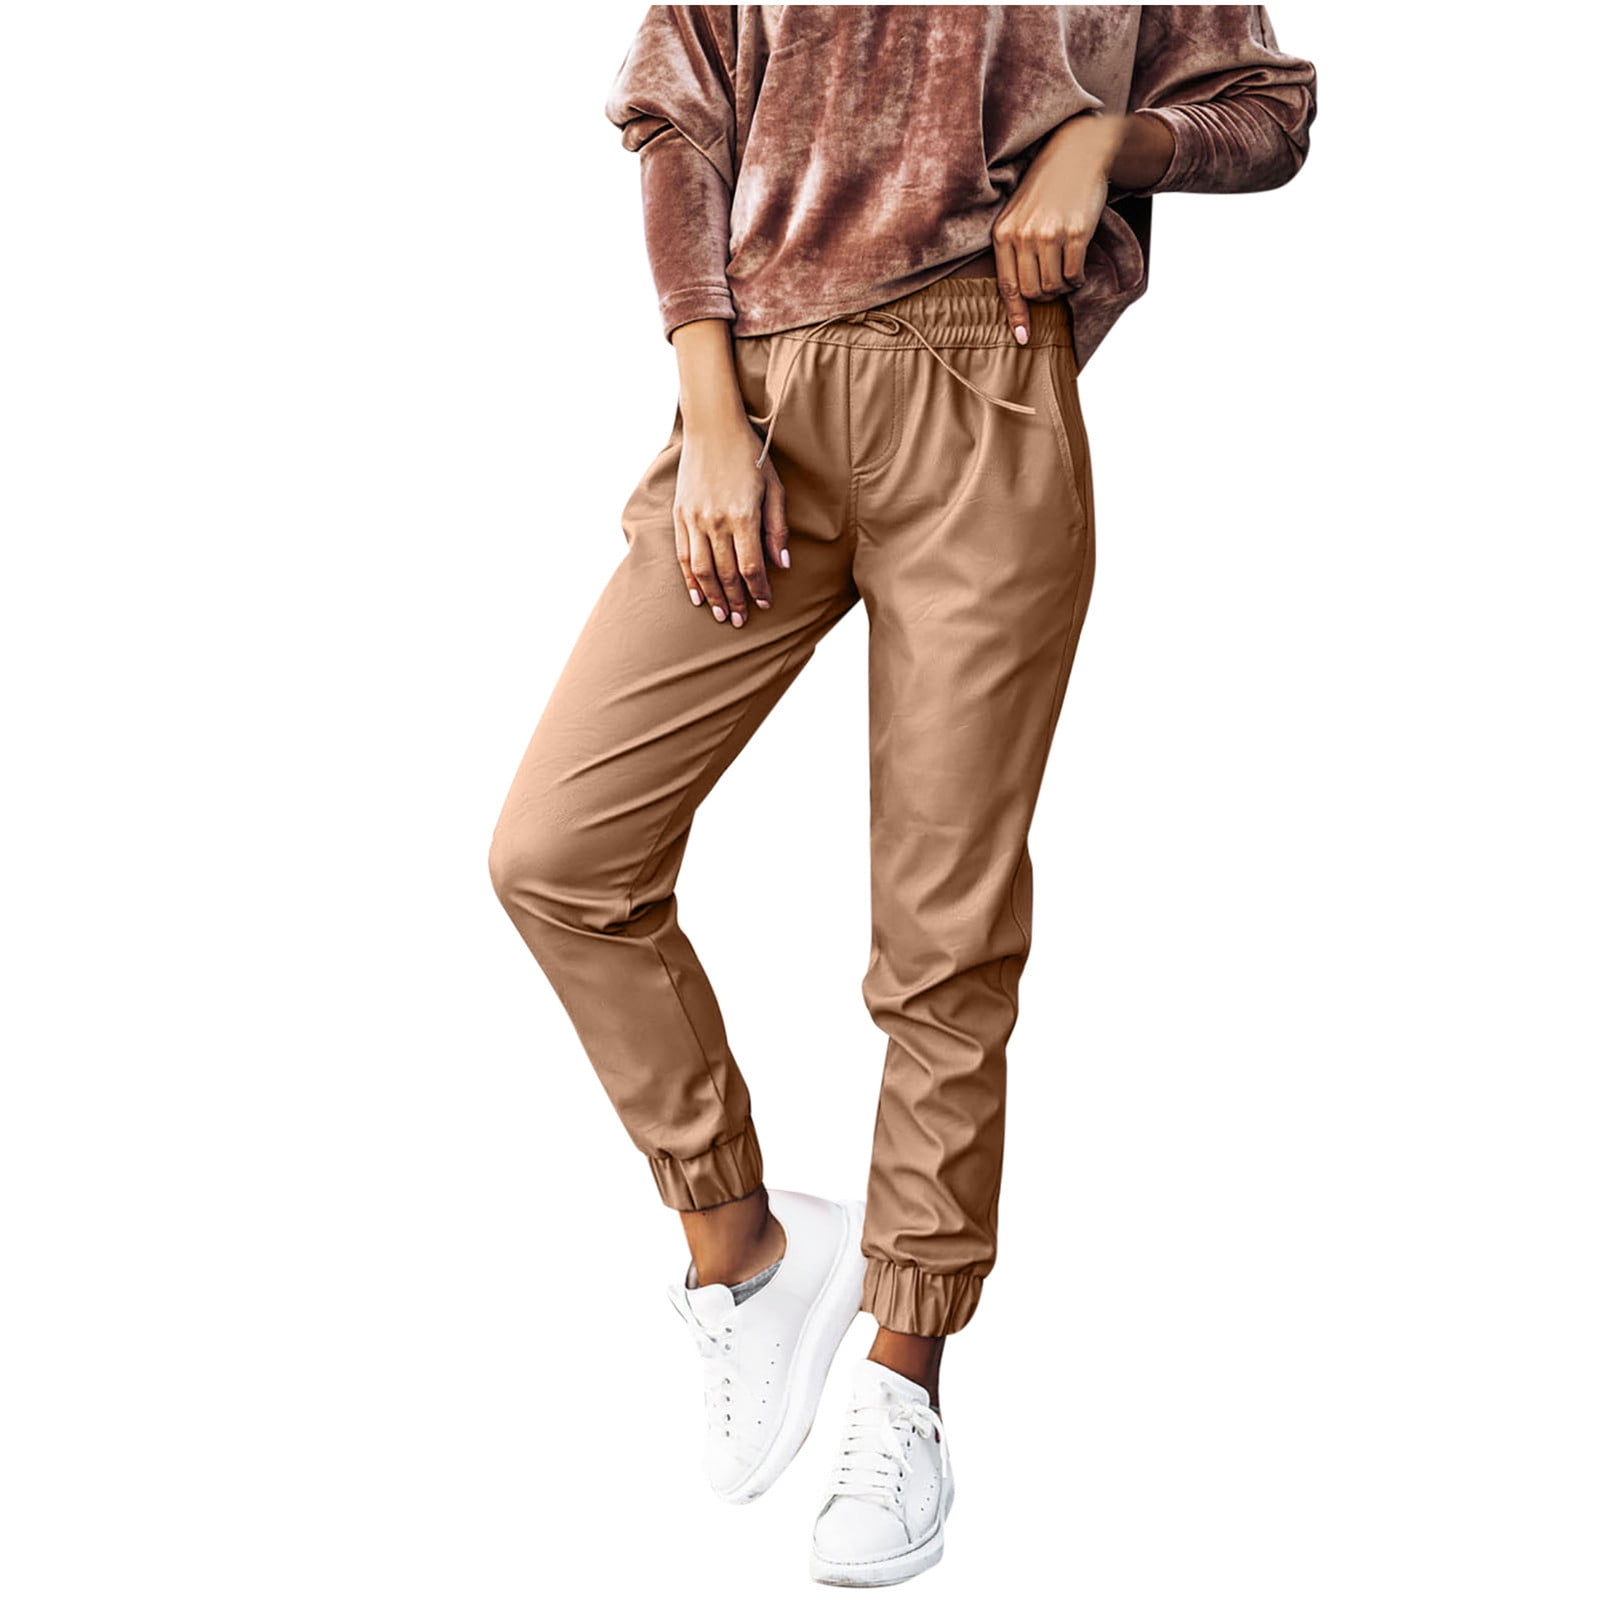 XFLWAM Faux Leather Jogger Pants High Waisted Thick Tummy Control Slimming  Stretchy Leggings Pants Cropped Tapered Pu Leather Pants Khaki L